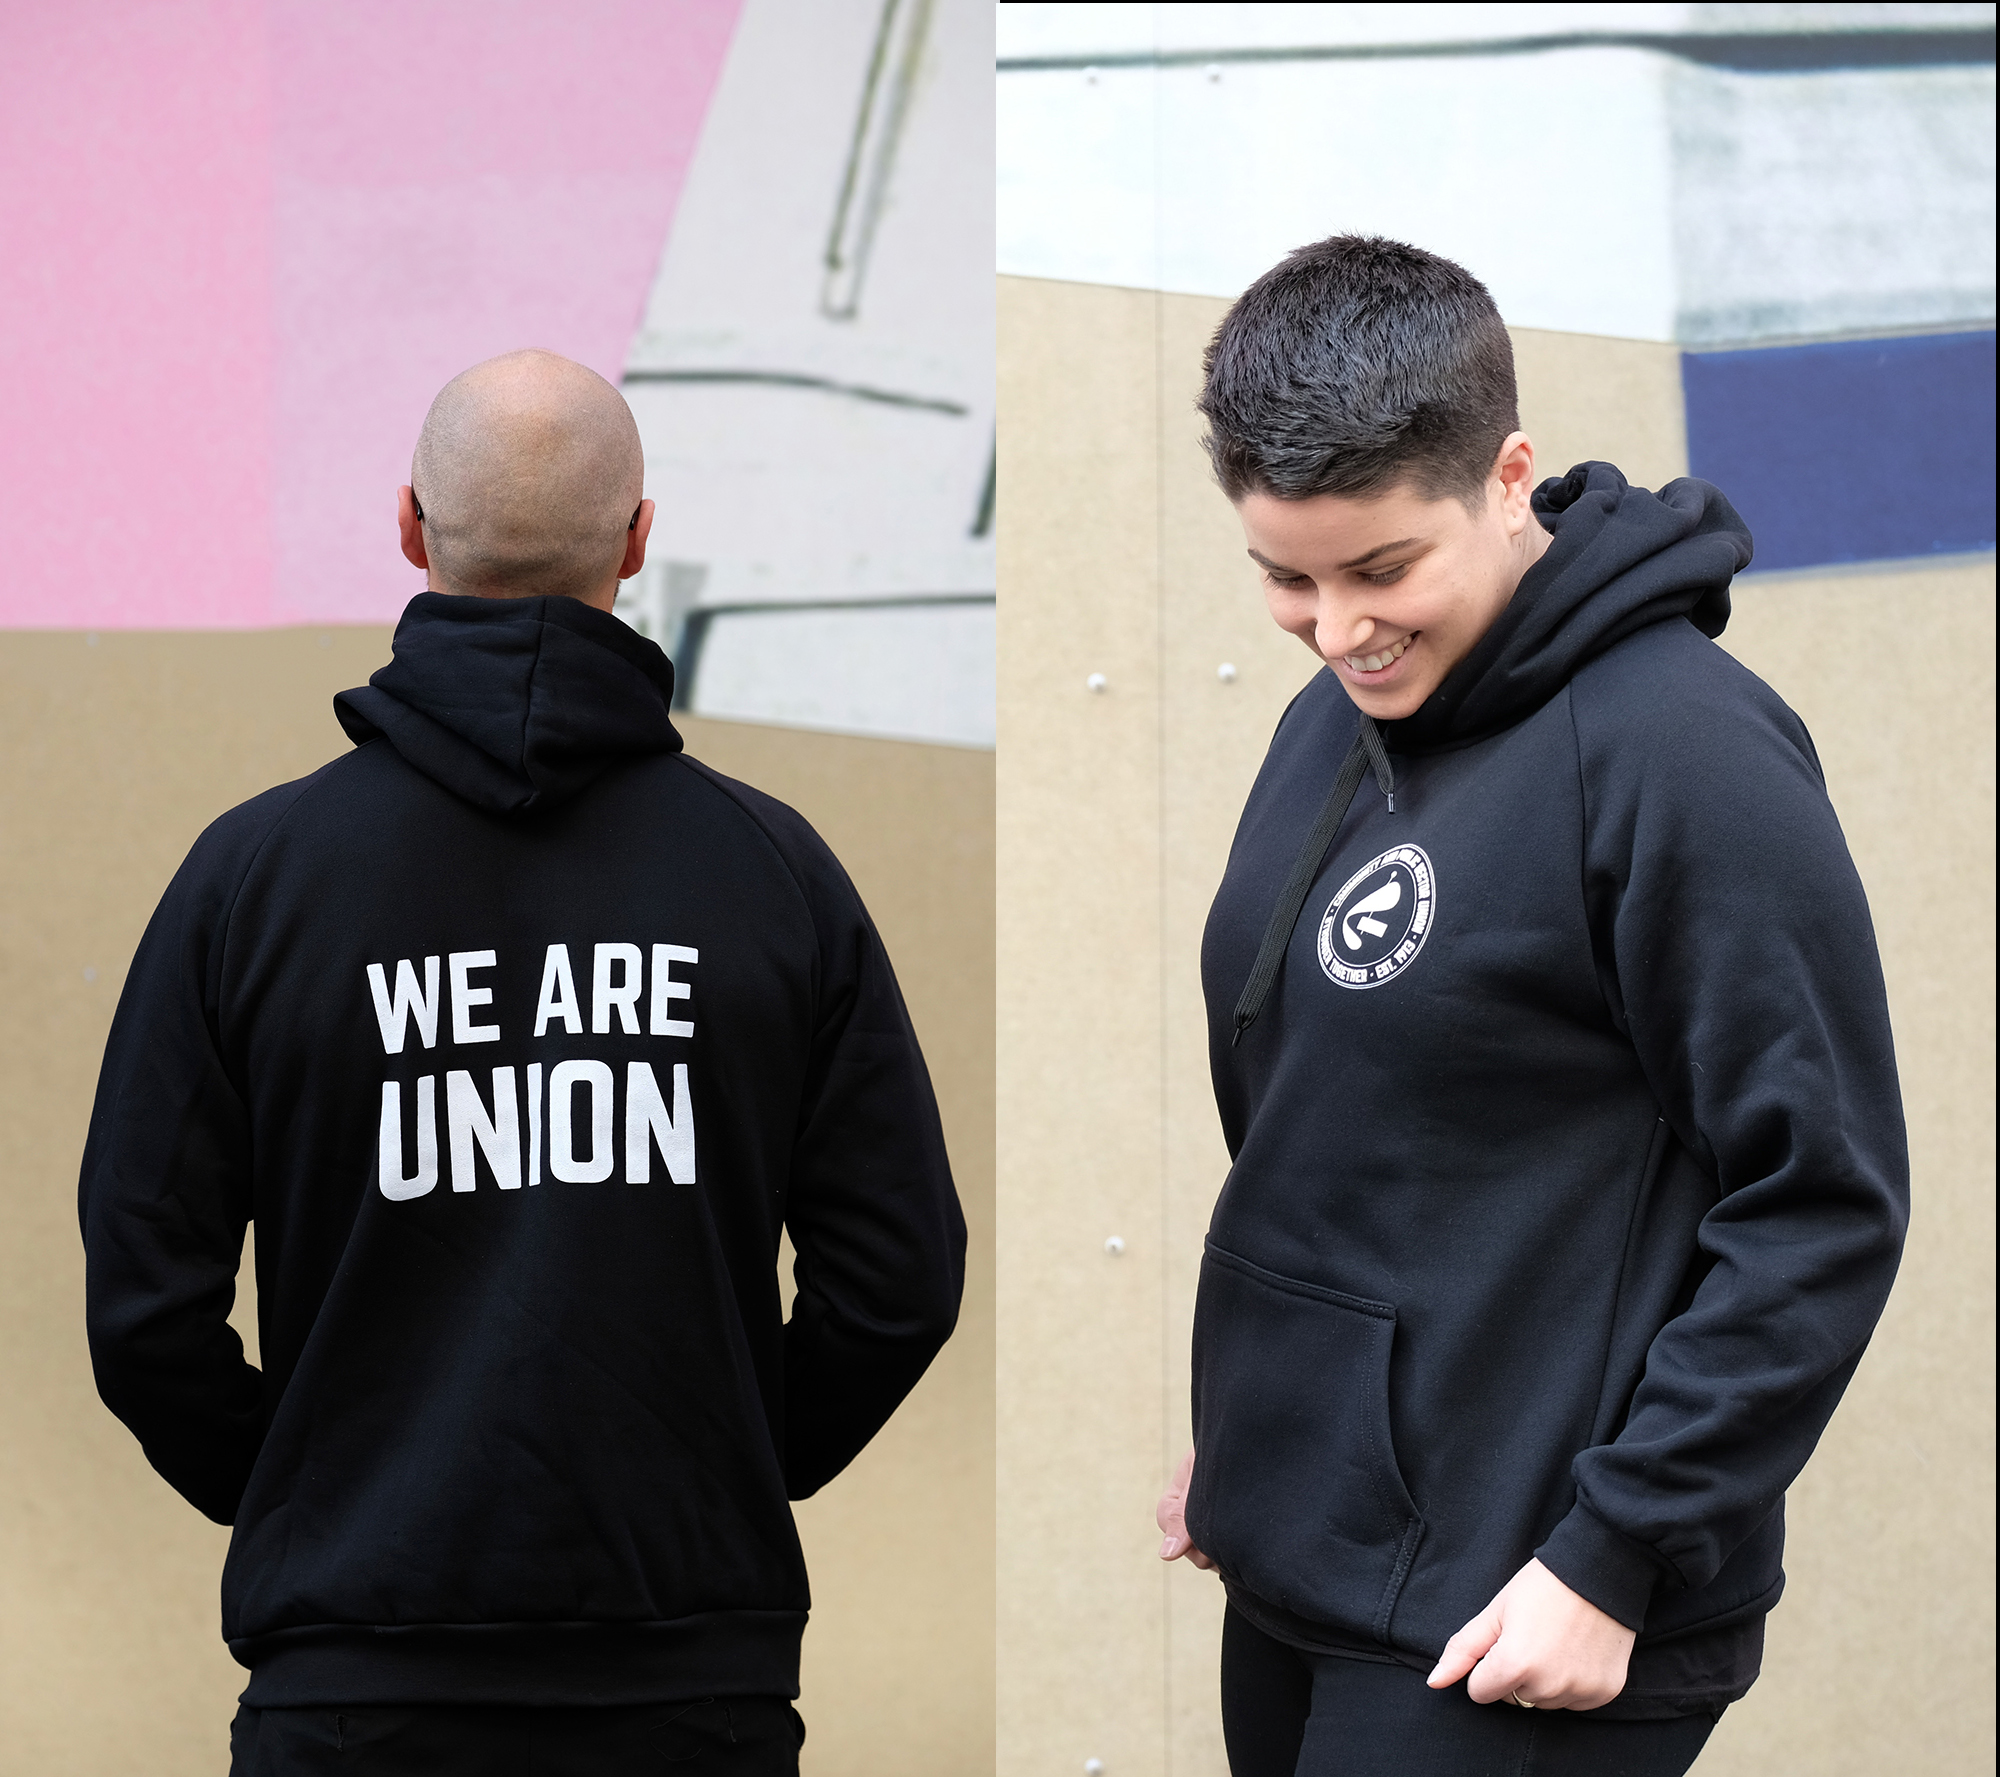 We are Union Hoodie (size 3XL)